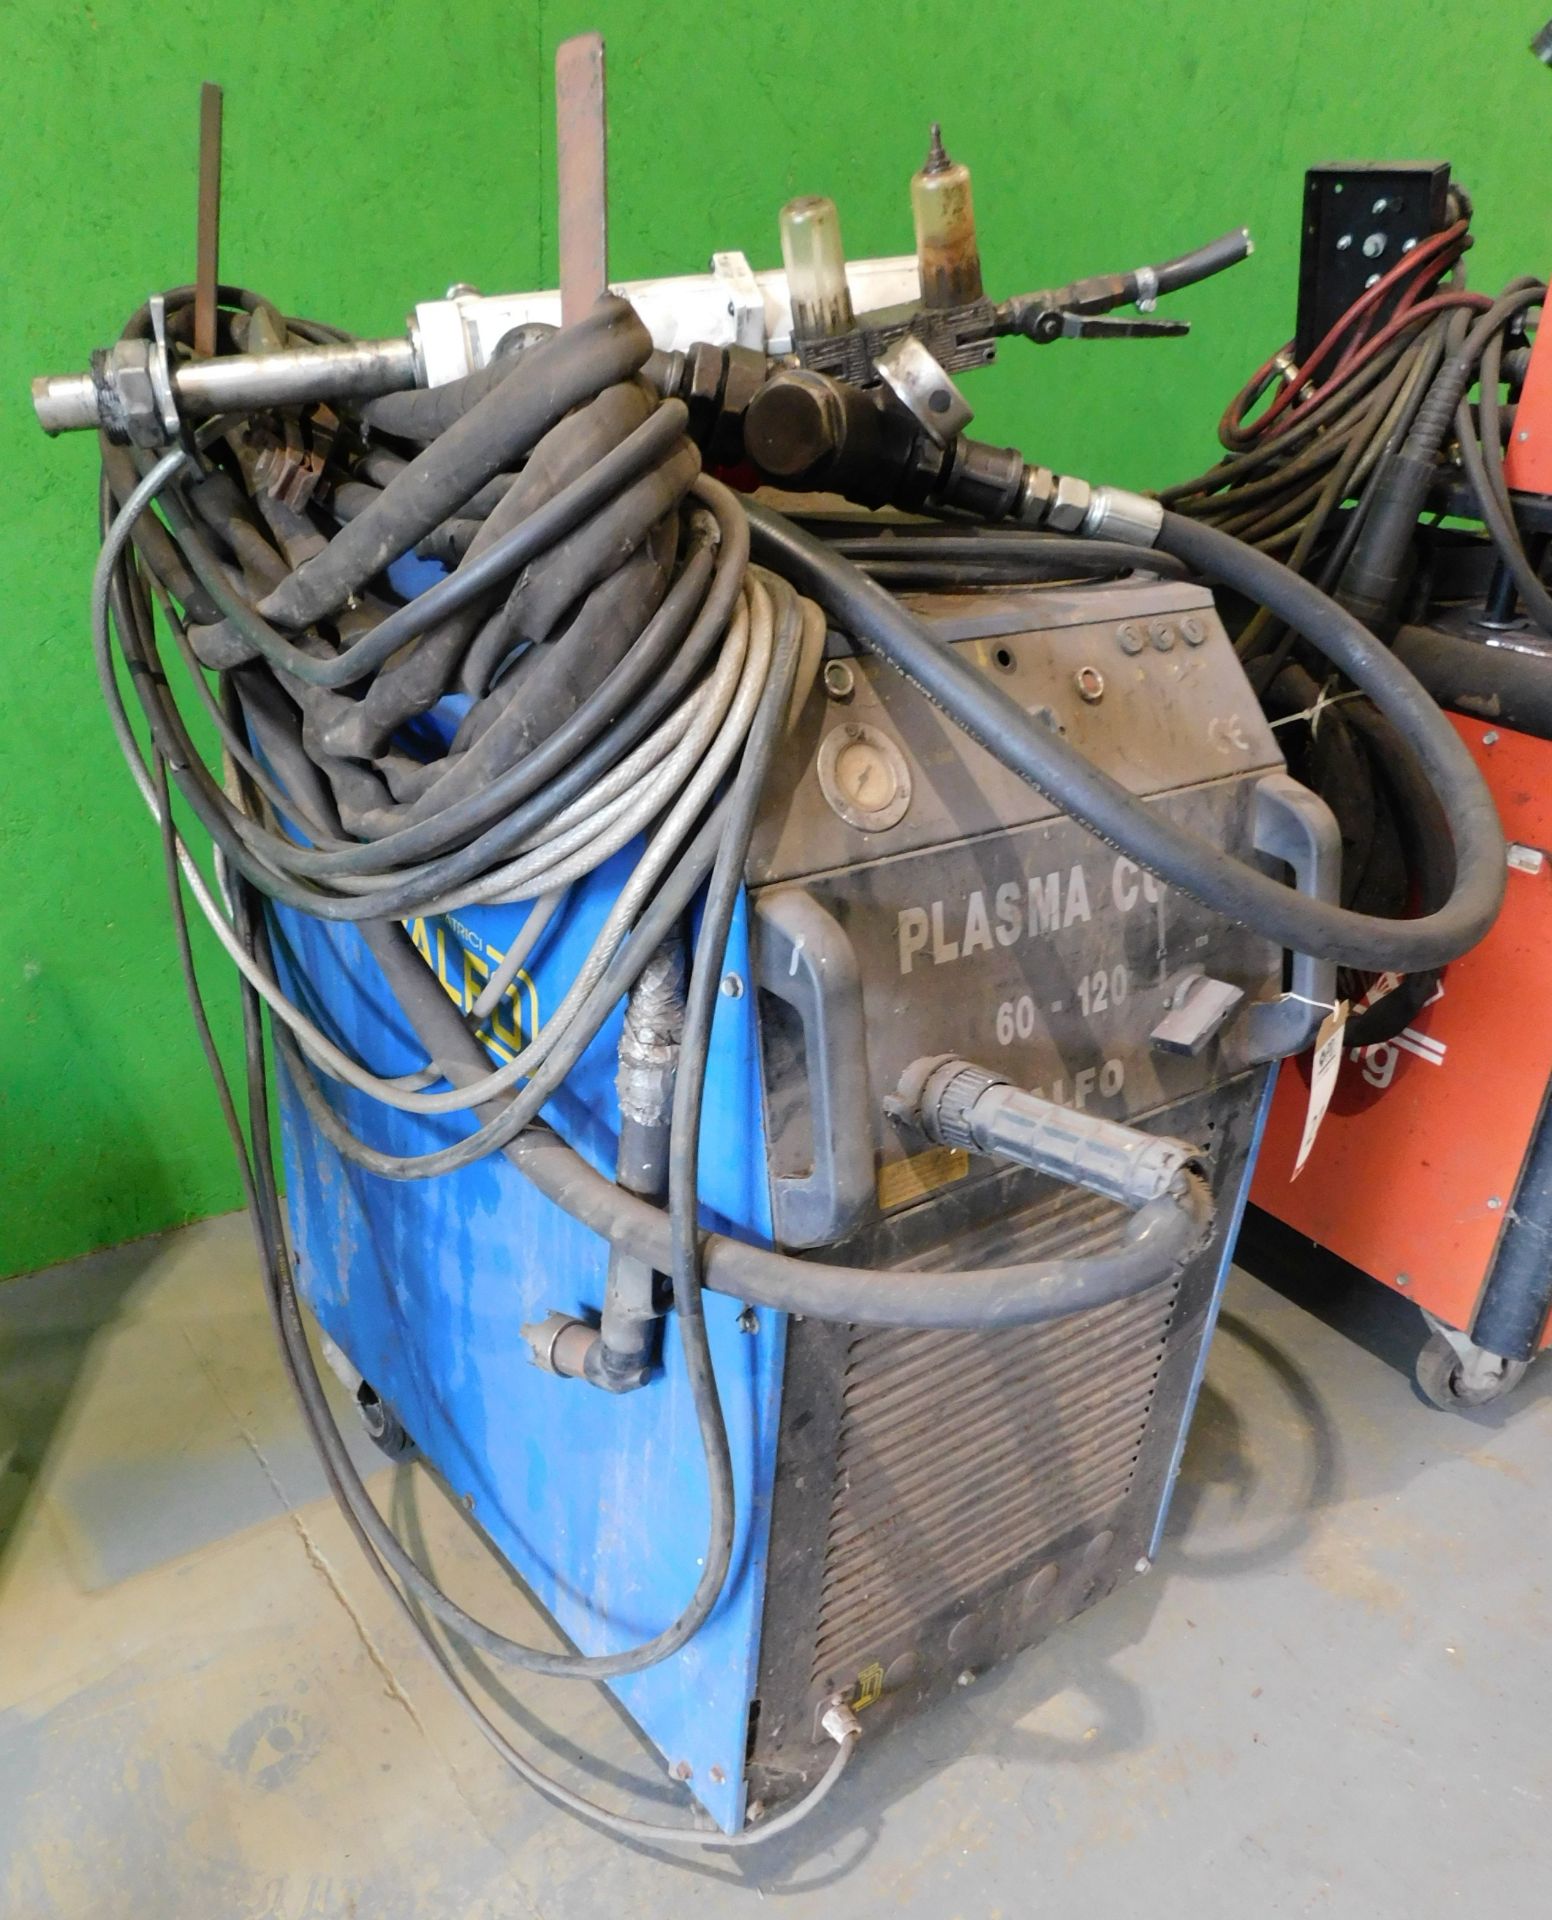 Valfo 60-120 Plasma Cutter (Located Rugby. Please Refer to General Notes) - Bild 2 aus 7